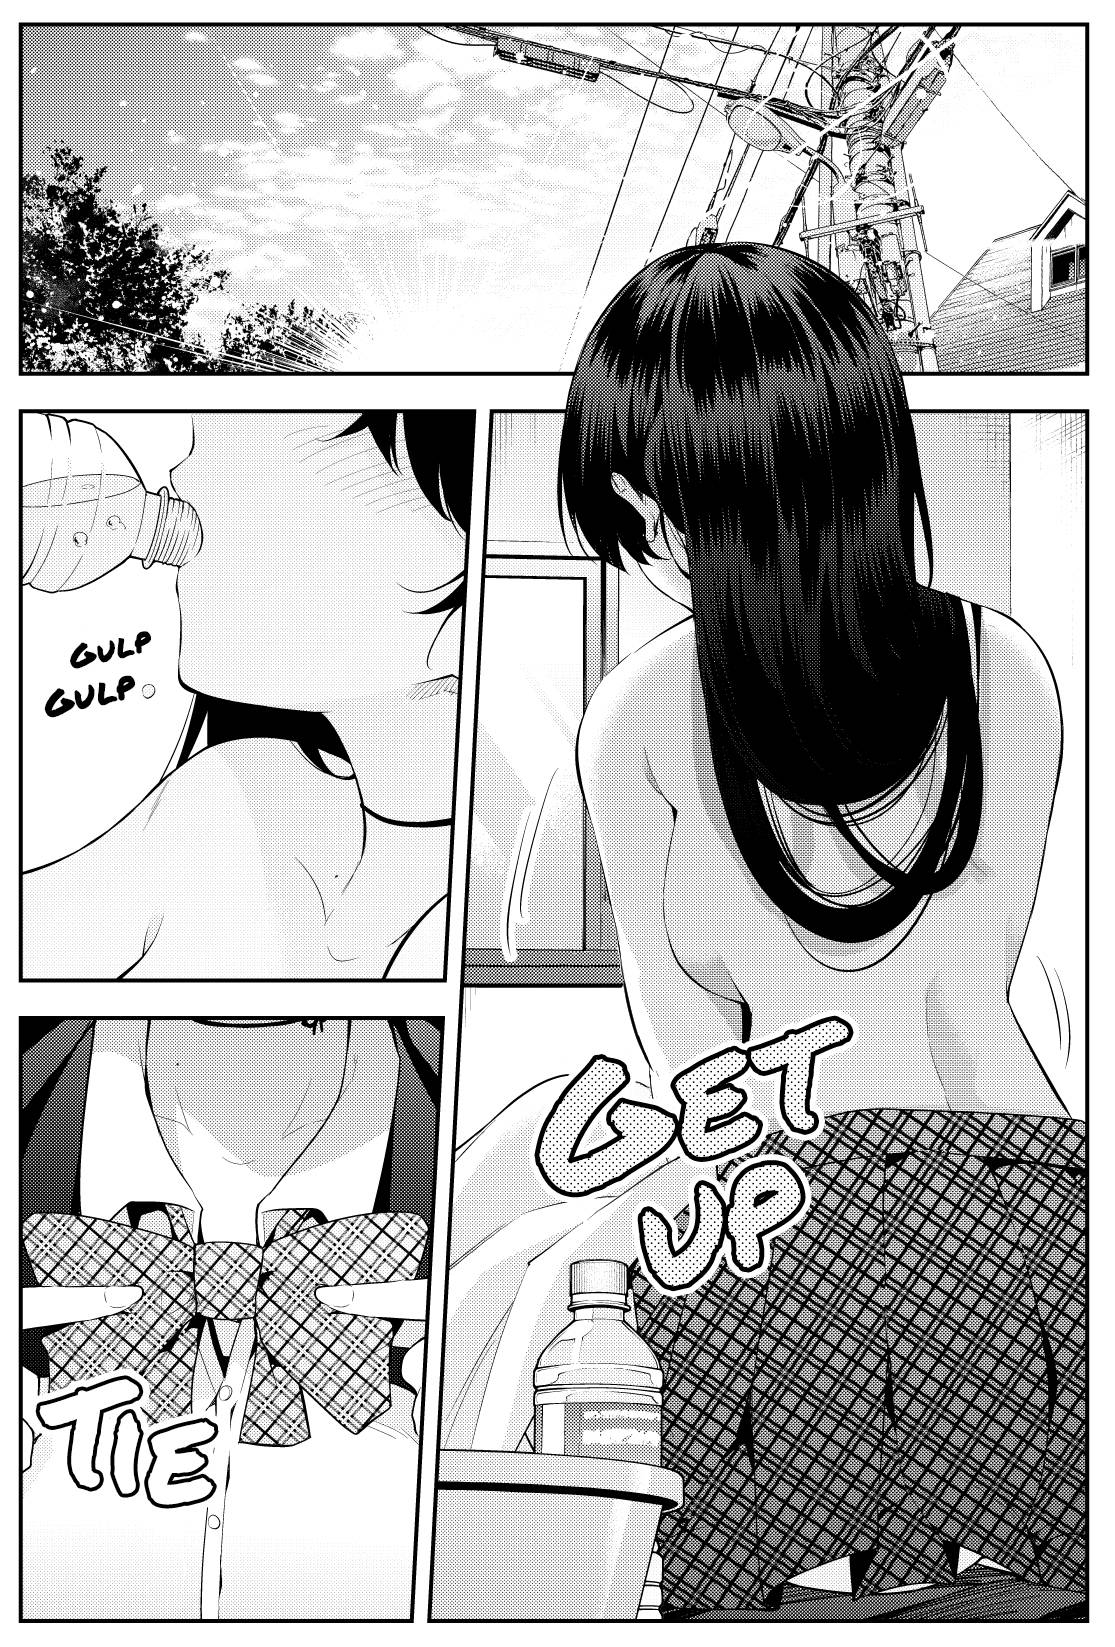 The Story Of A Manga Artist Confined By A Strange High School Girl - chapter 48 - #1